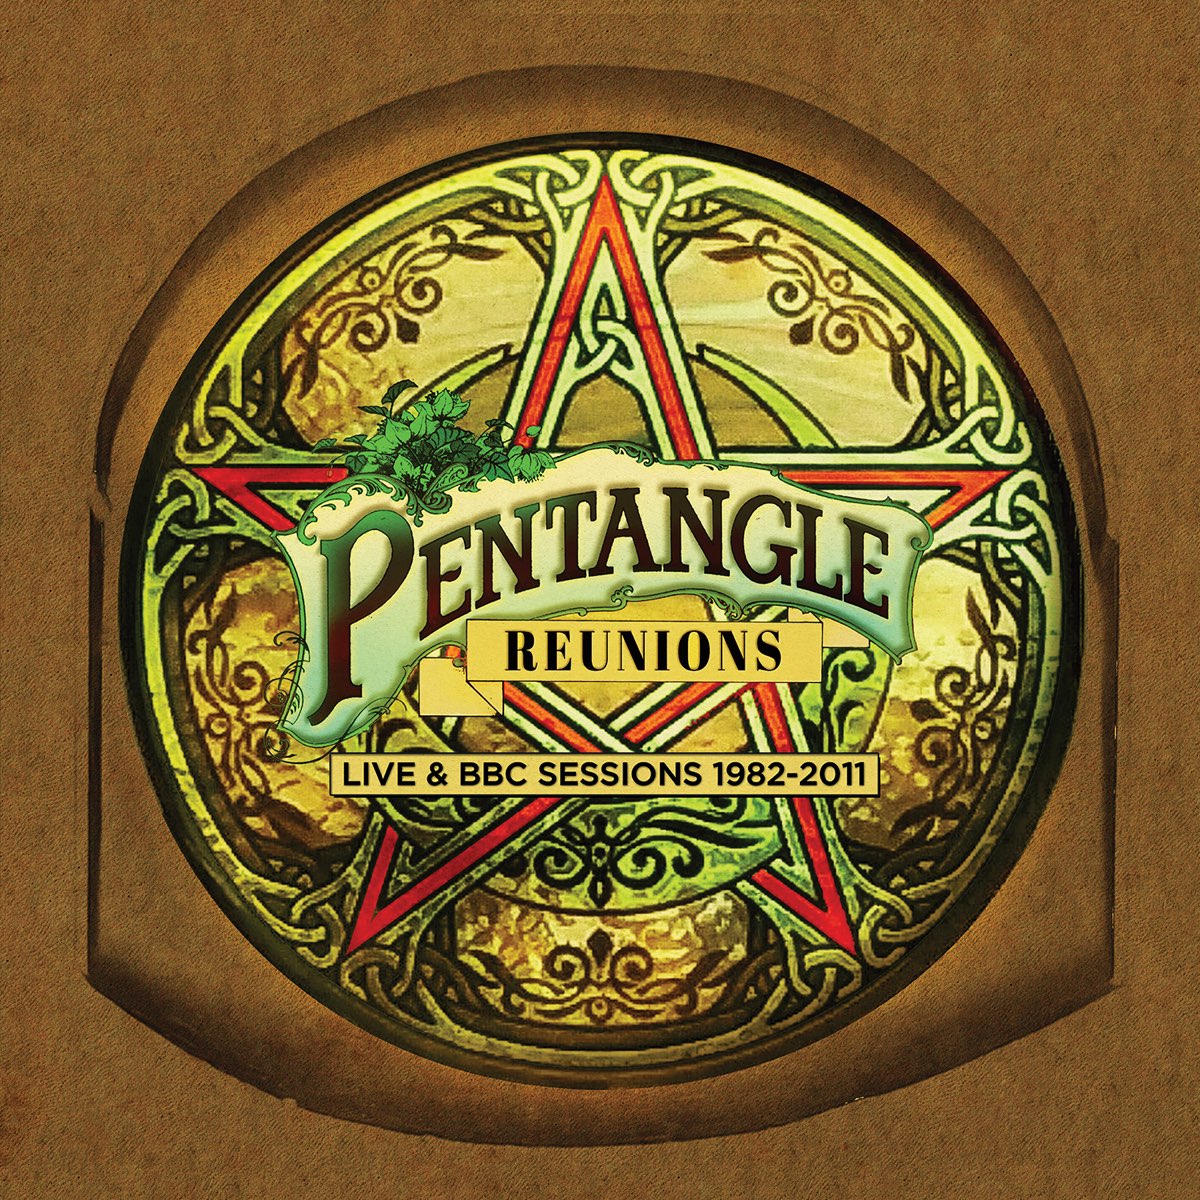 Reunions: Live & BBC Sessions 1982-2011 - Album by Pentangle - Apple Music